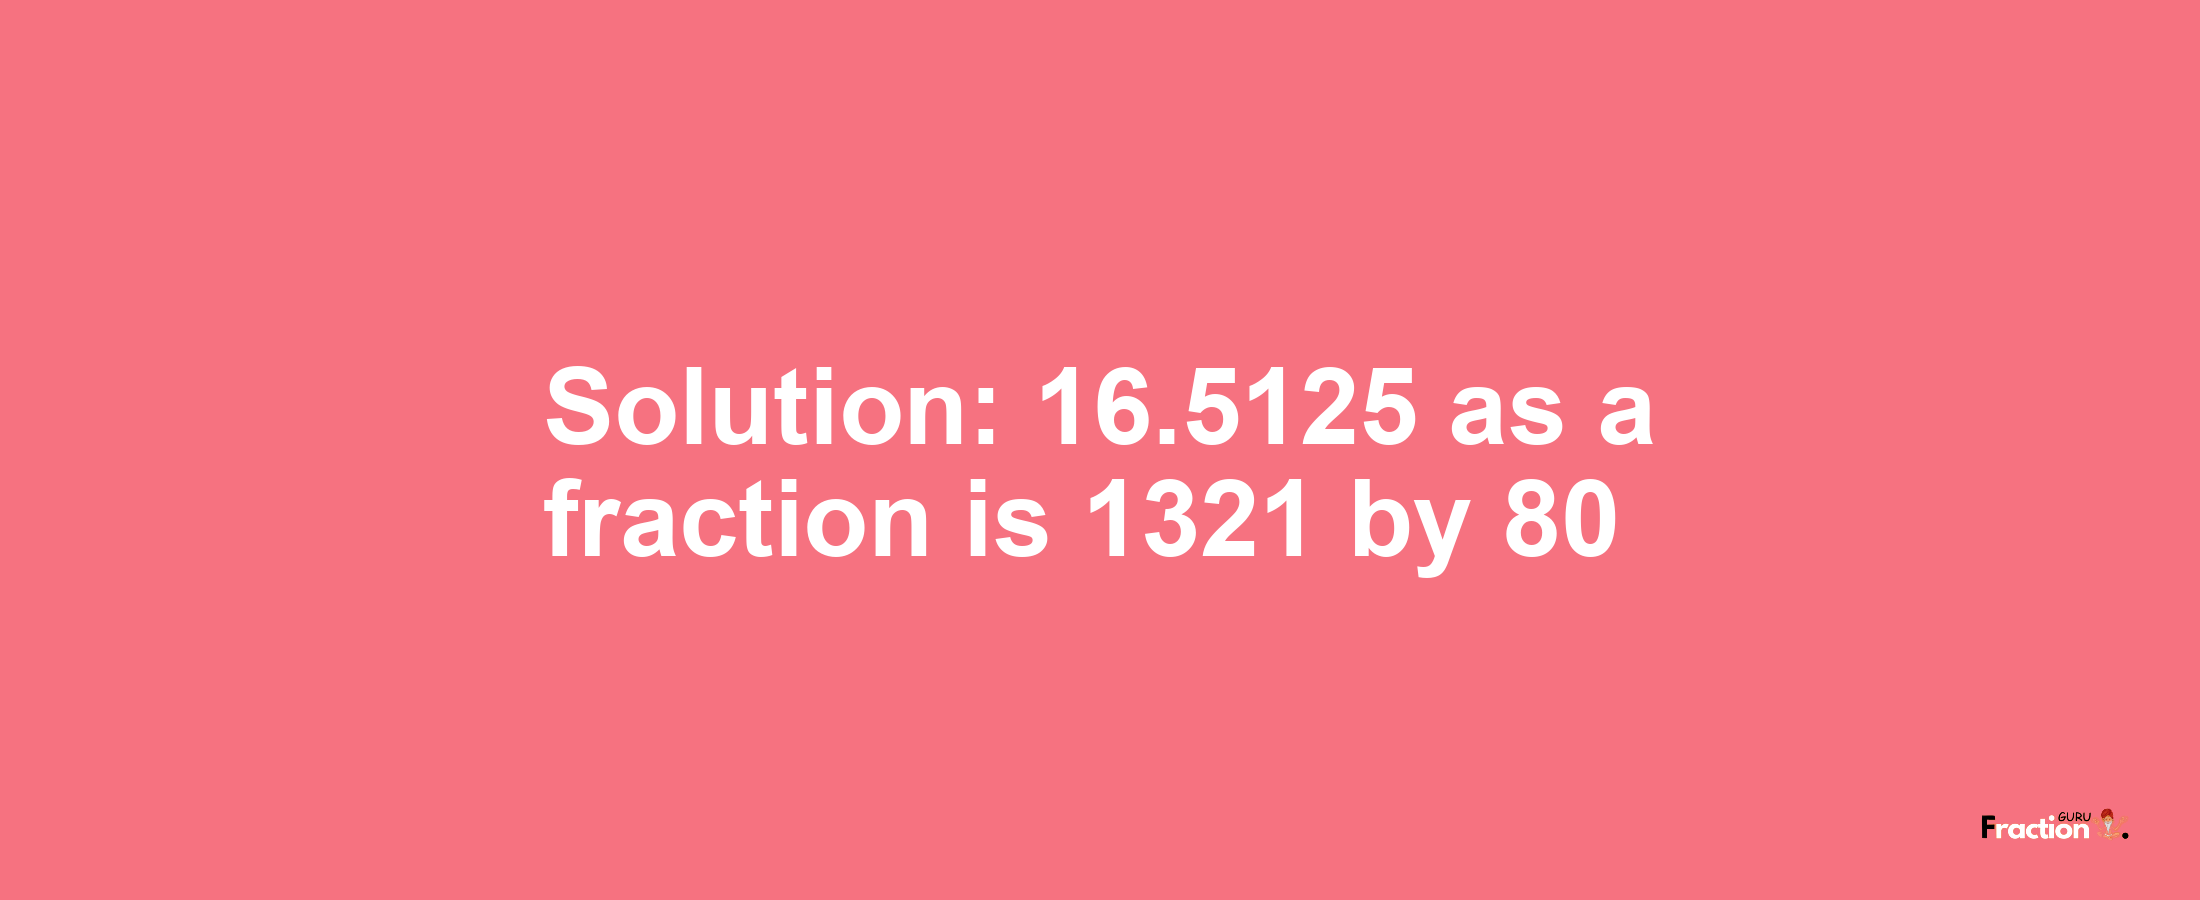 Solution:16.5125 as a fraction is 1321/80